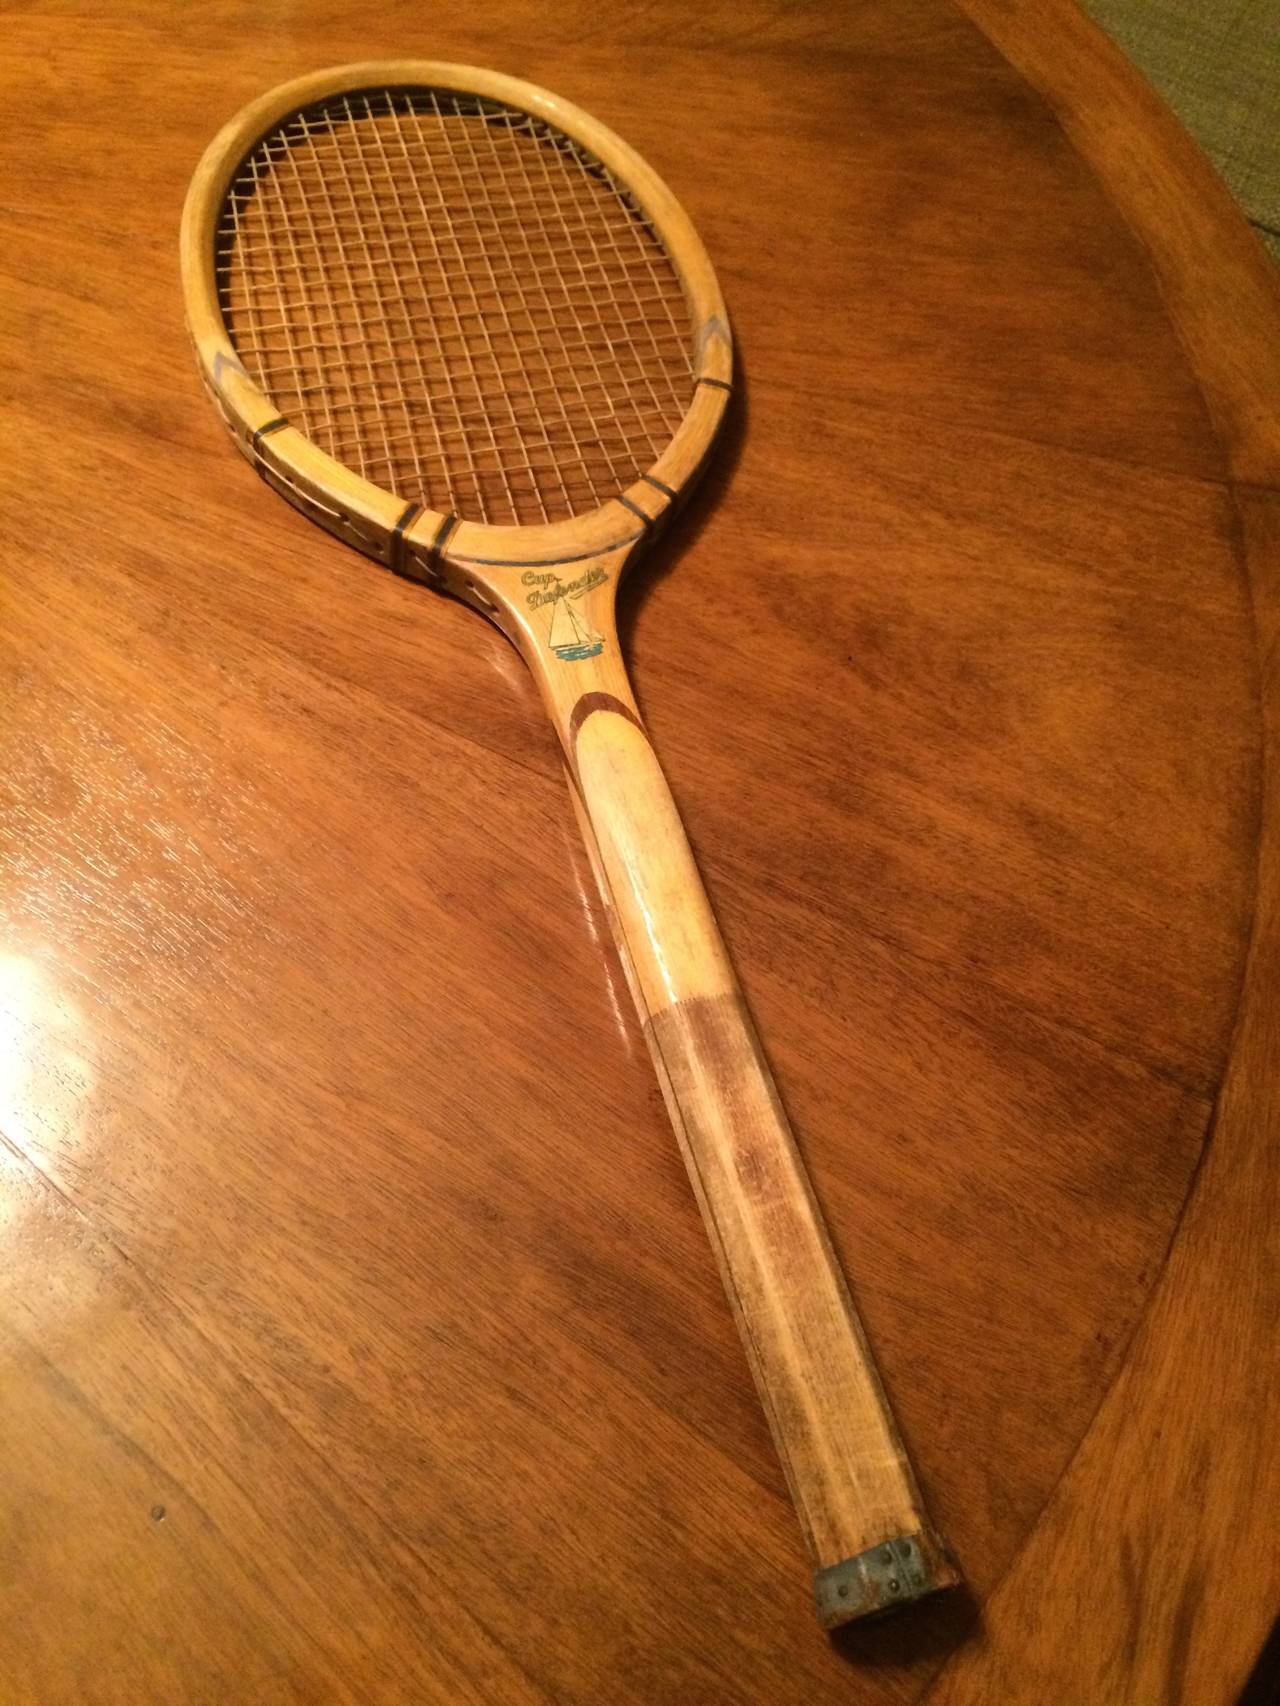 This is a vintage Kent Tennis racket in near mint condition, grip is gone, but easily replaced, case is in one piece but dry rotten, would be a great display piece. Marked Kent Cup Defender.